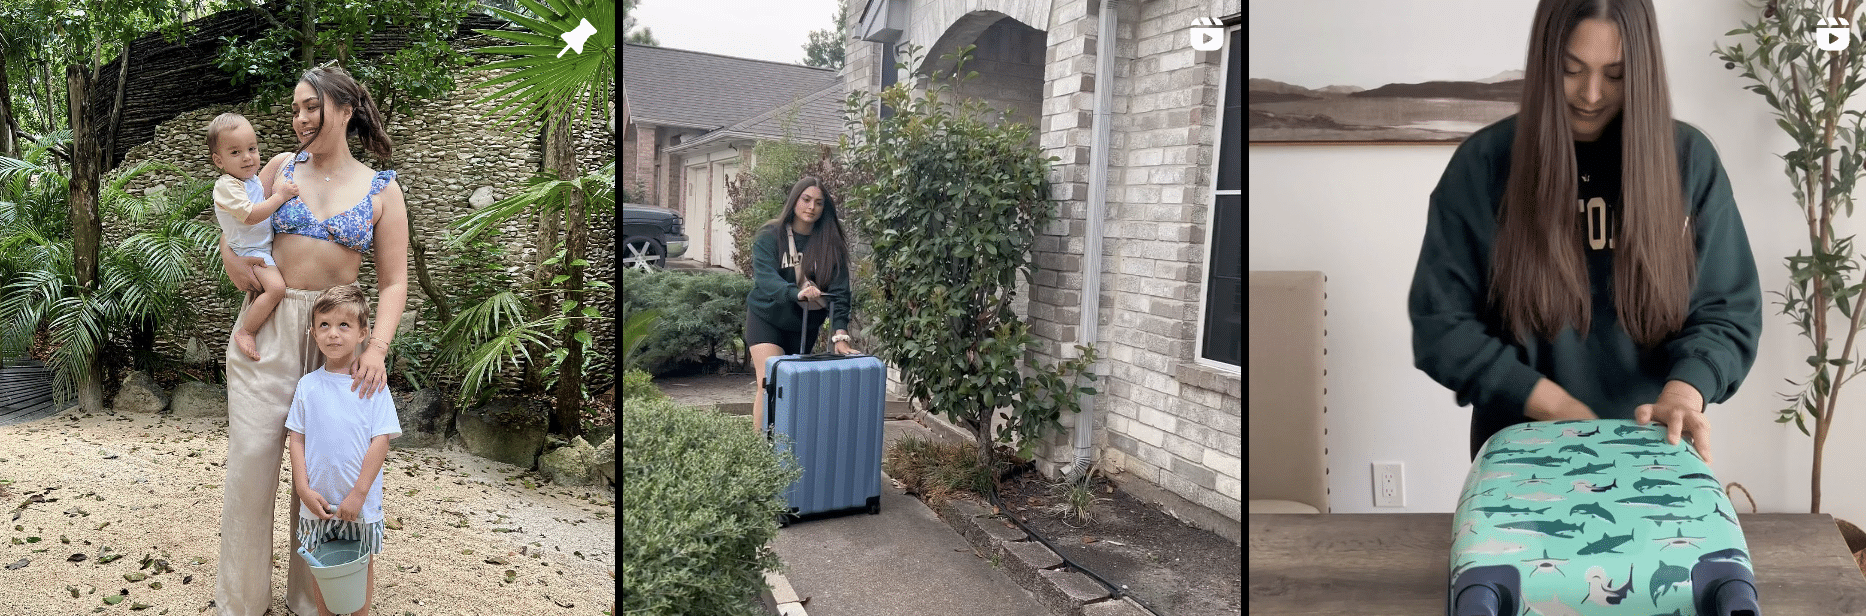 A woman is holding a suitcase in front of a house.